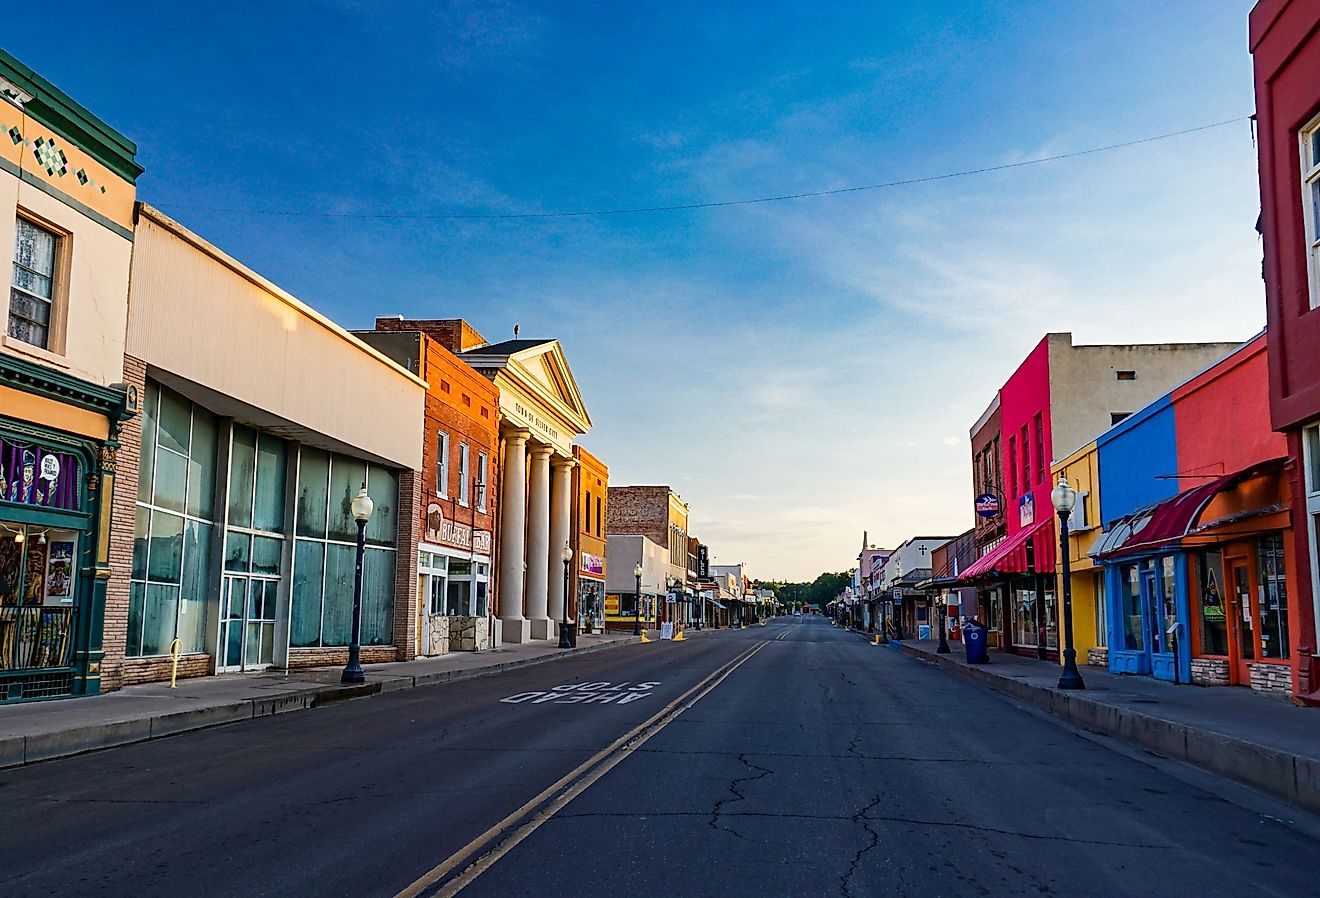 Bullard Street in downtown Silver City, looking north early on a summer morning. Image credit Underawesternsky via Shutterstock.